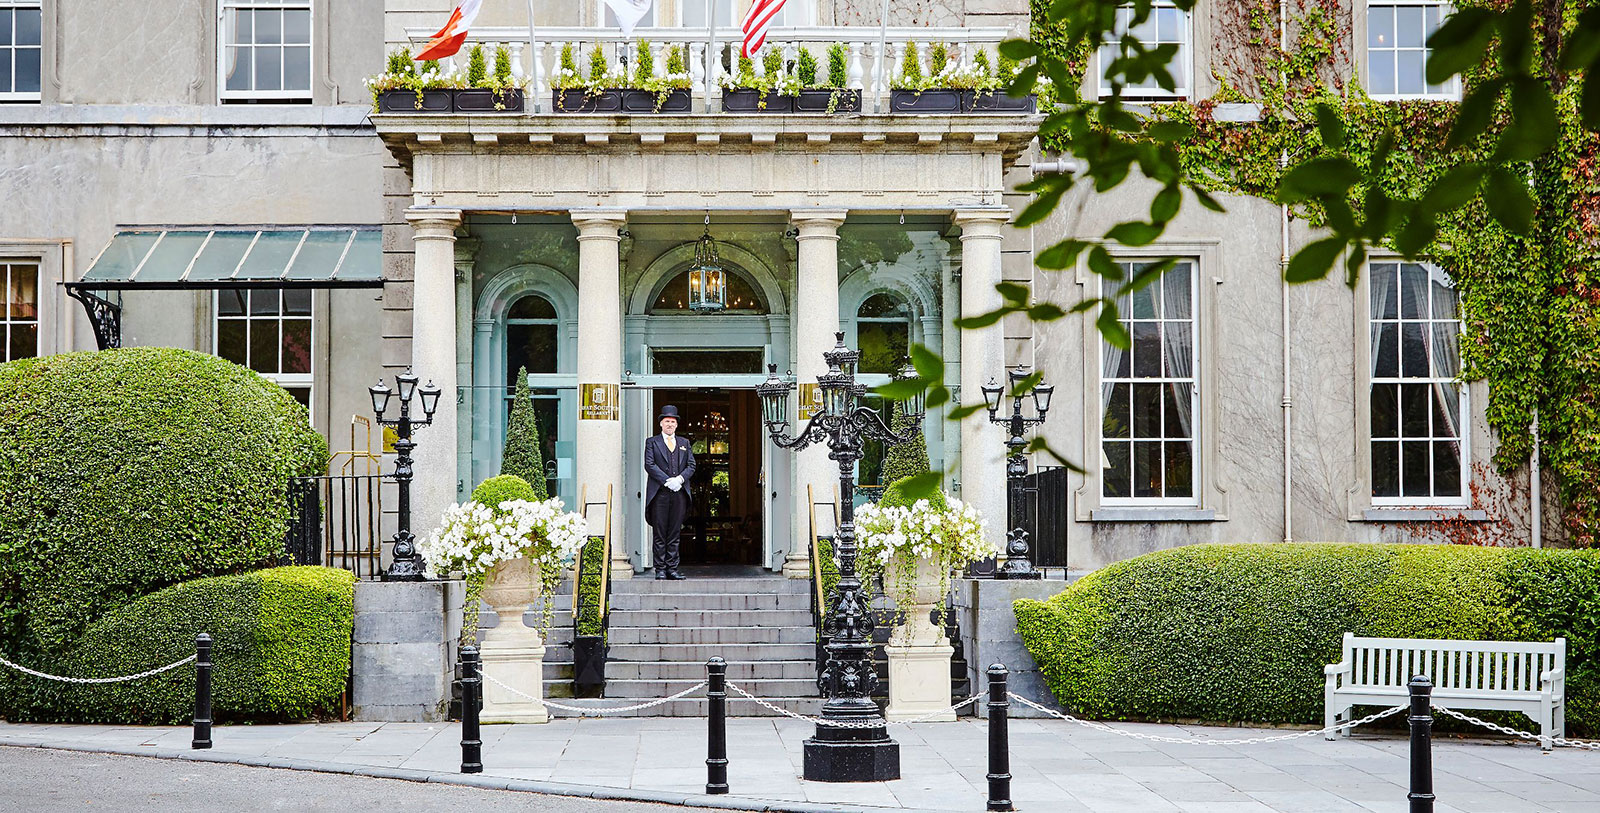 Image of hotel exterior Great Southern Killarney, 1854, Member of Historic Hotels Worldwide, in Killarney, Ireland, Overview